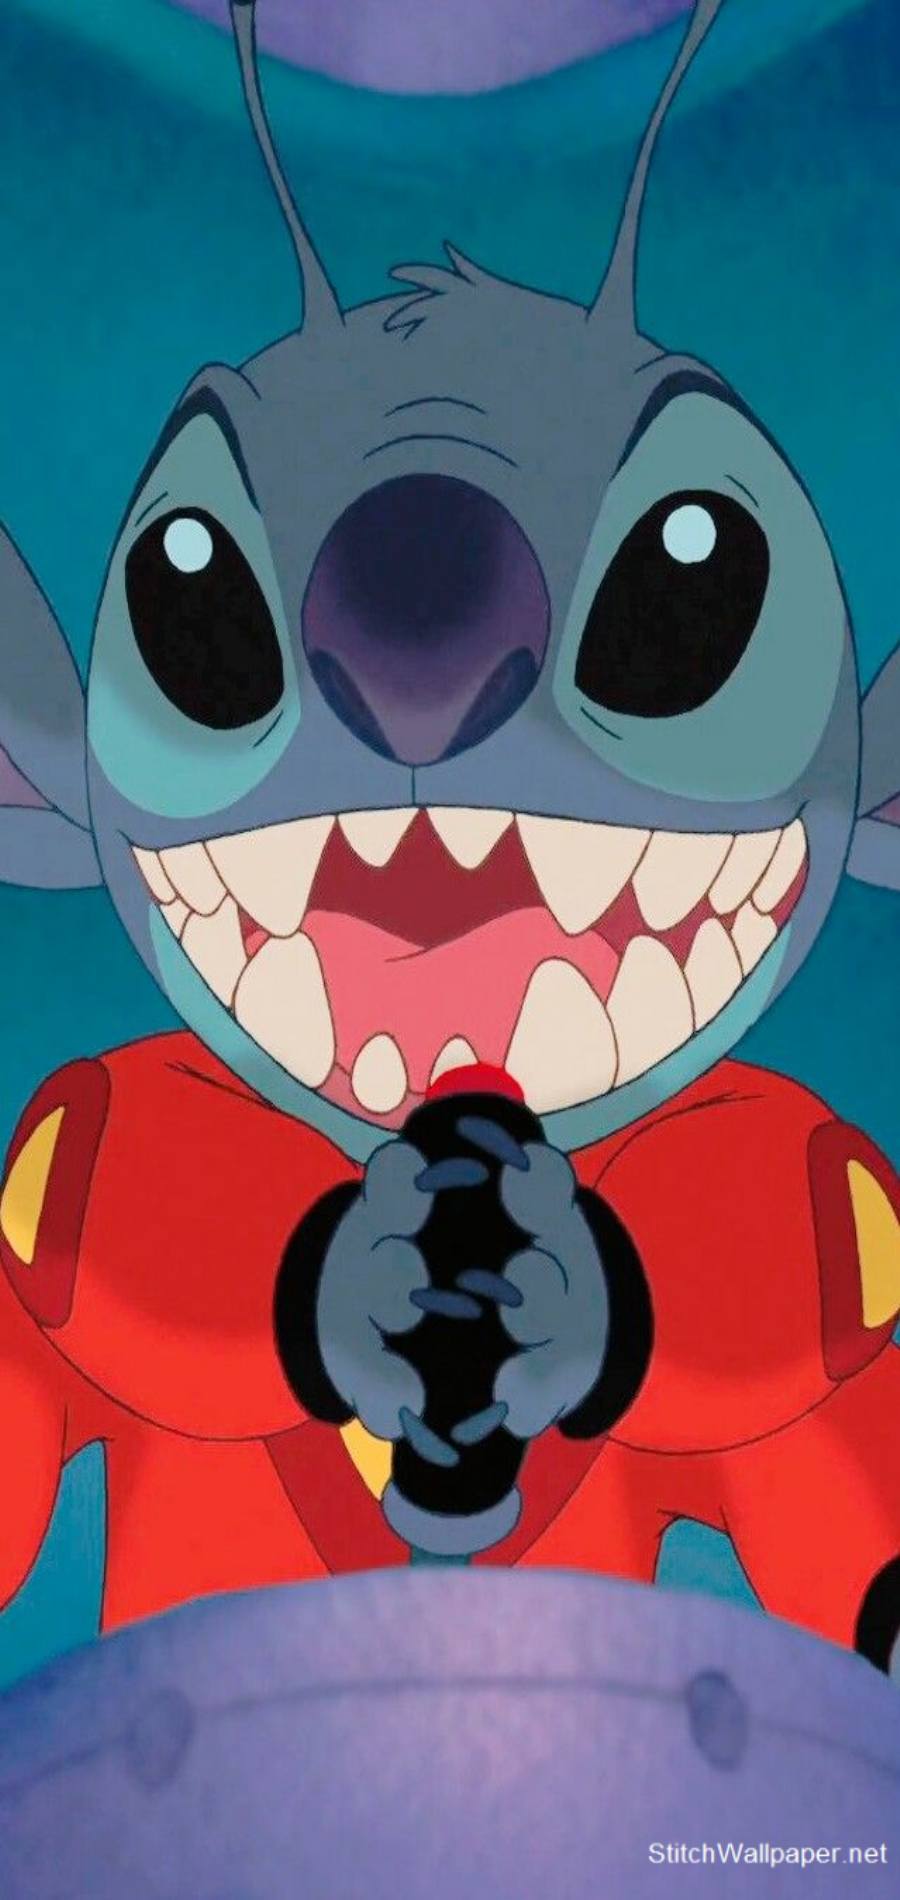 angry stitch wallpaper for iphone